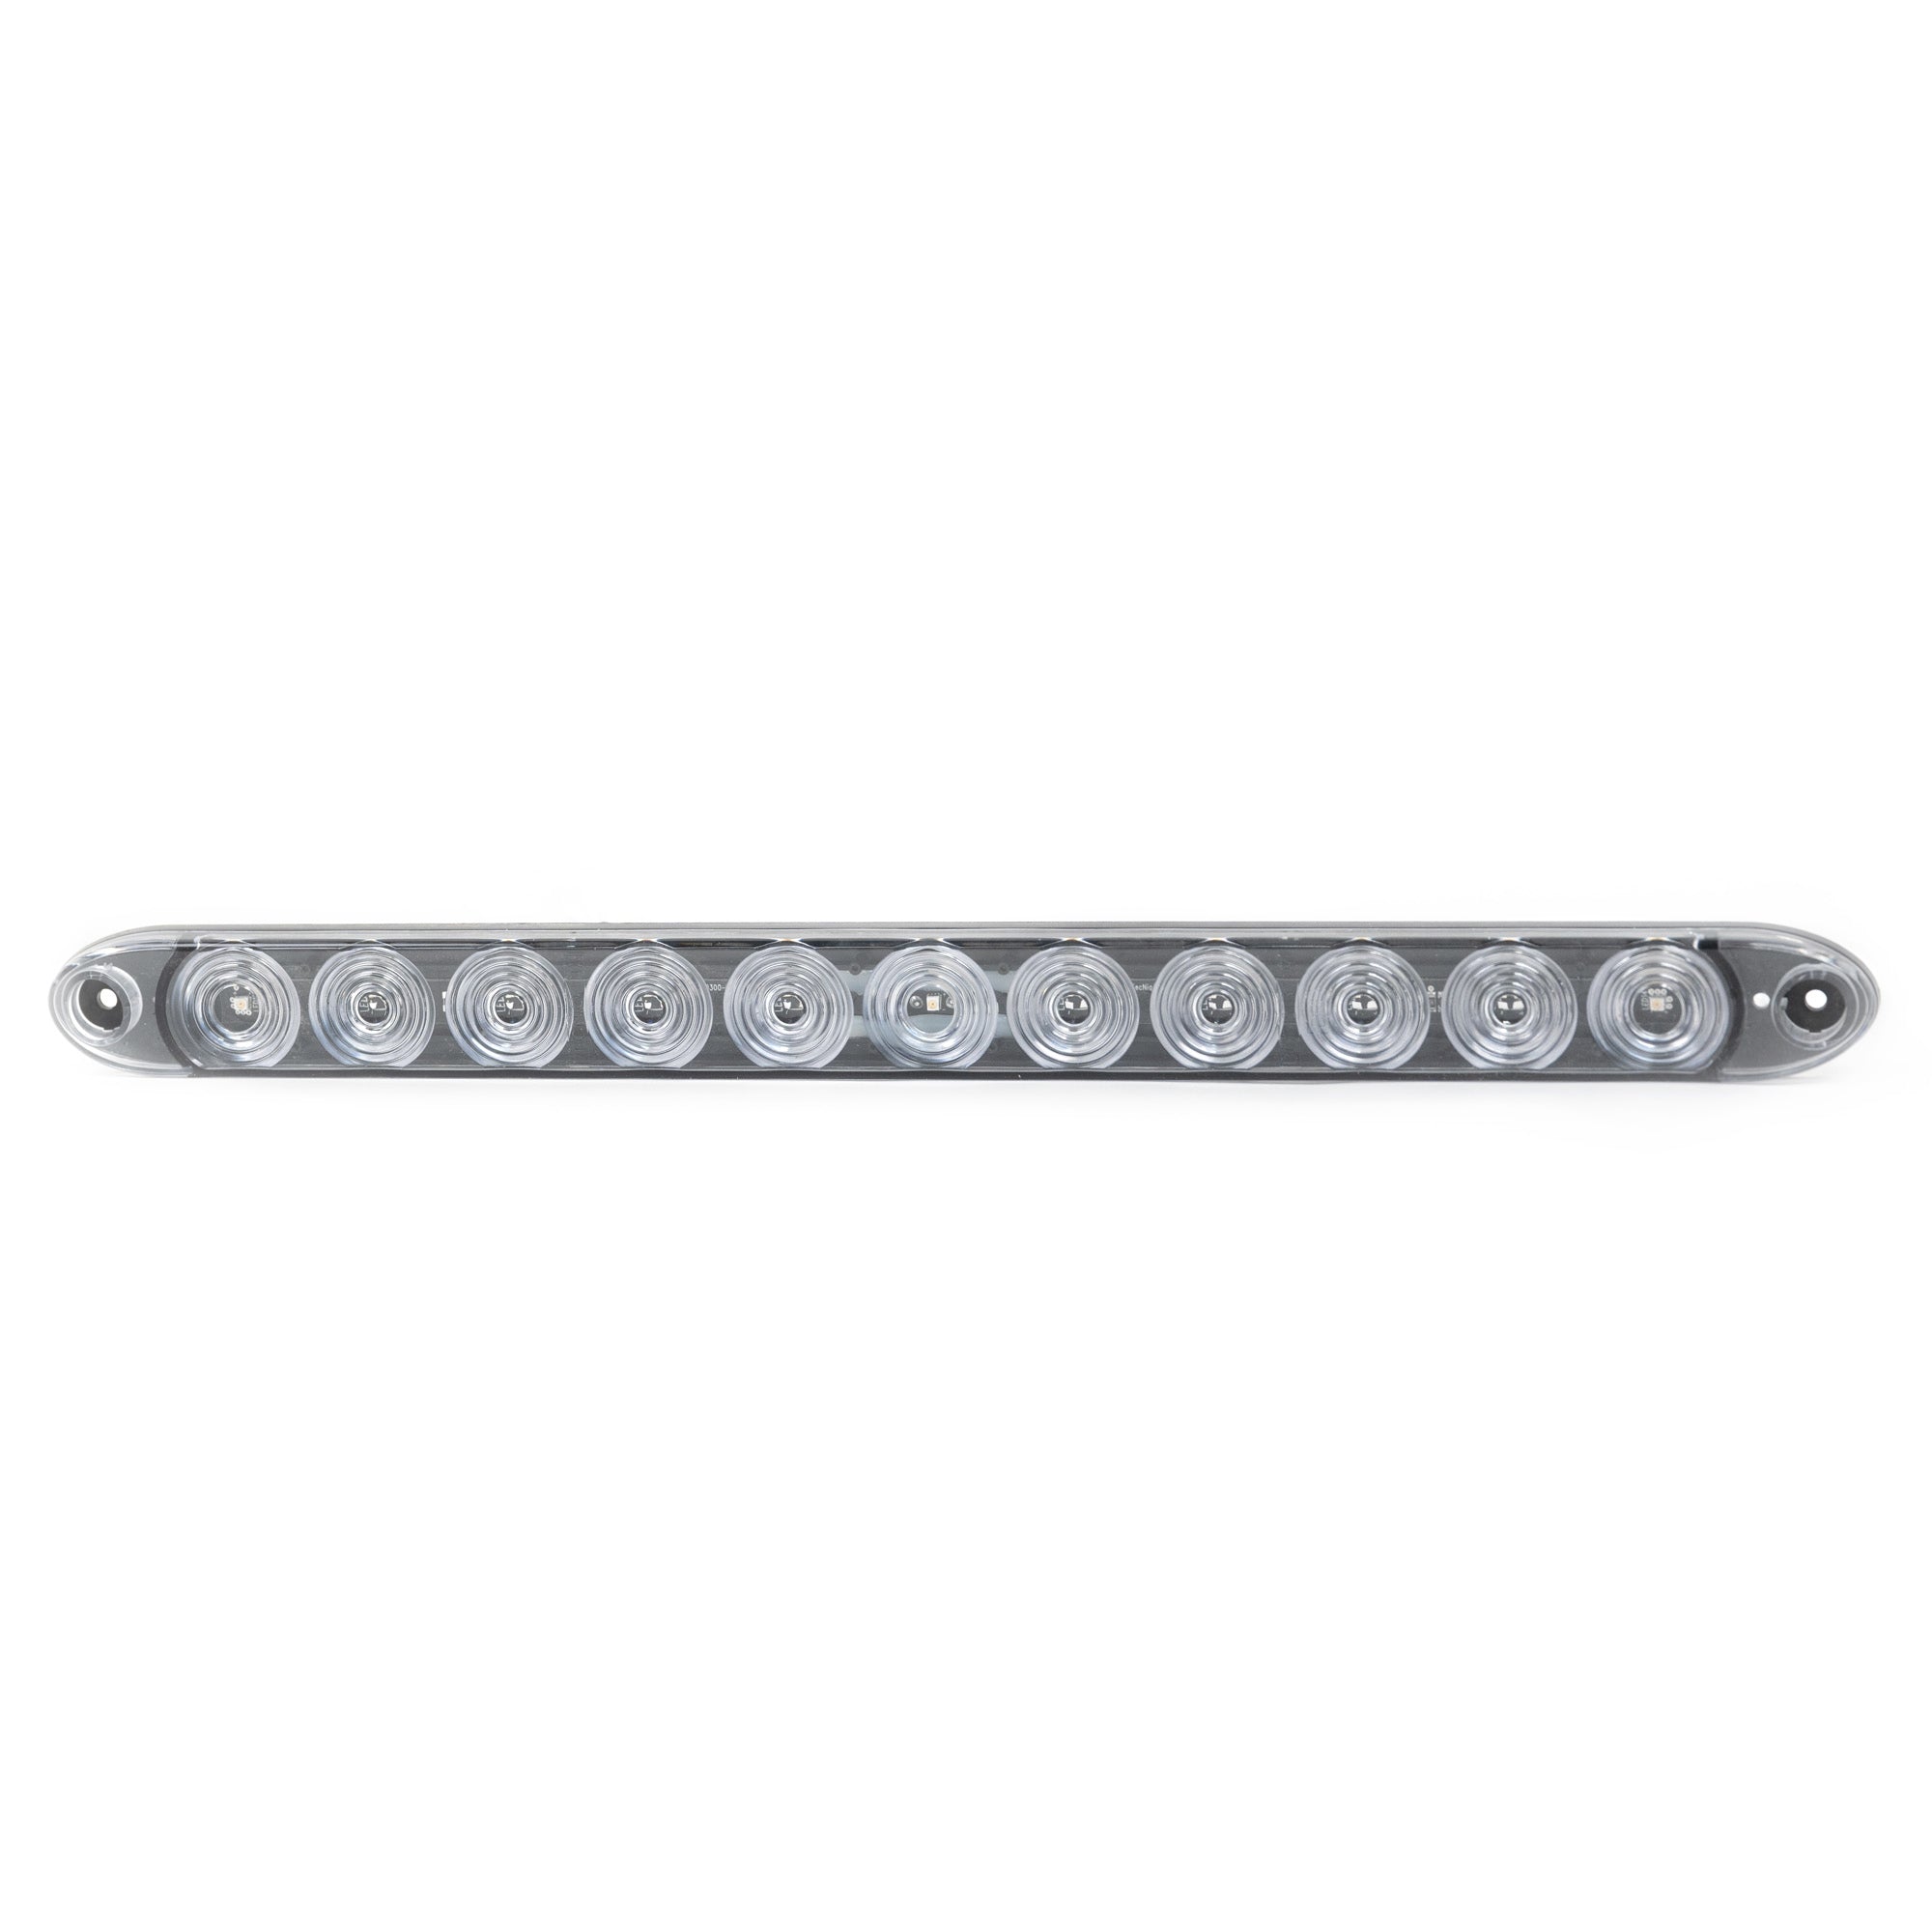 Red LED Low Profile Trailer ID Light Bar | Trailer Parts Outlet